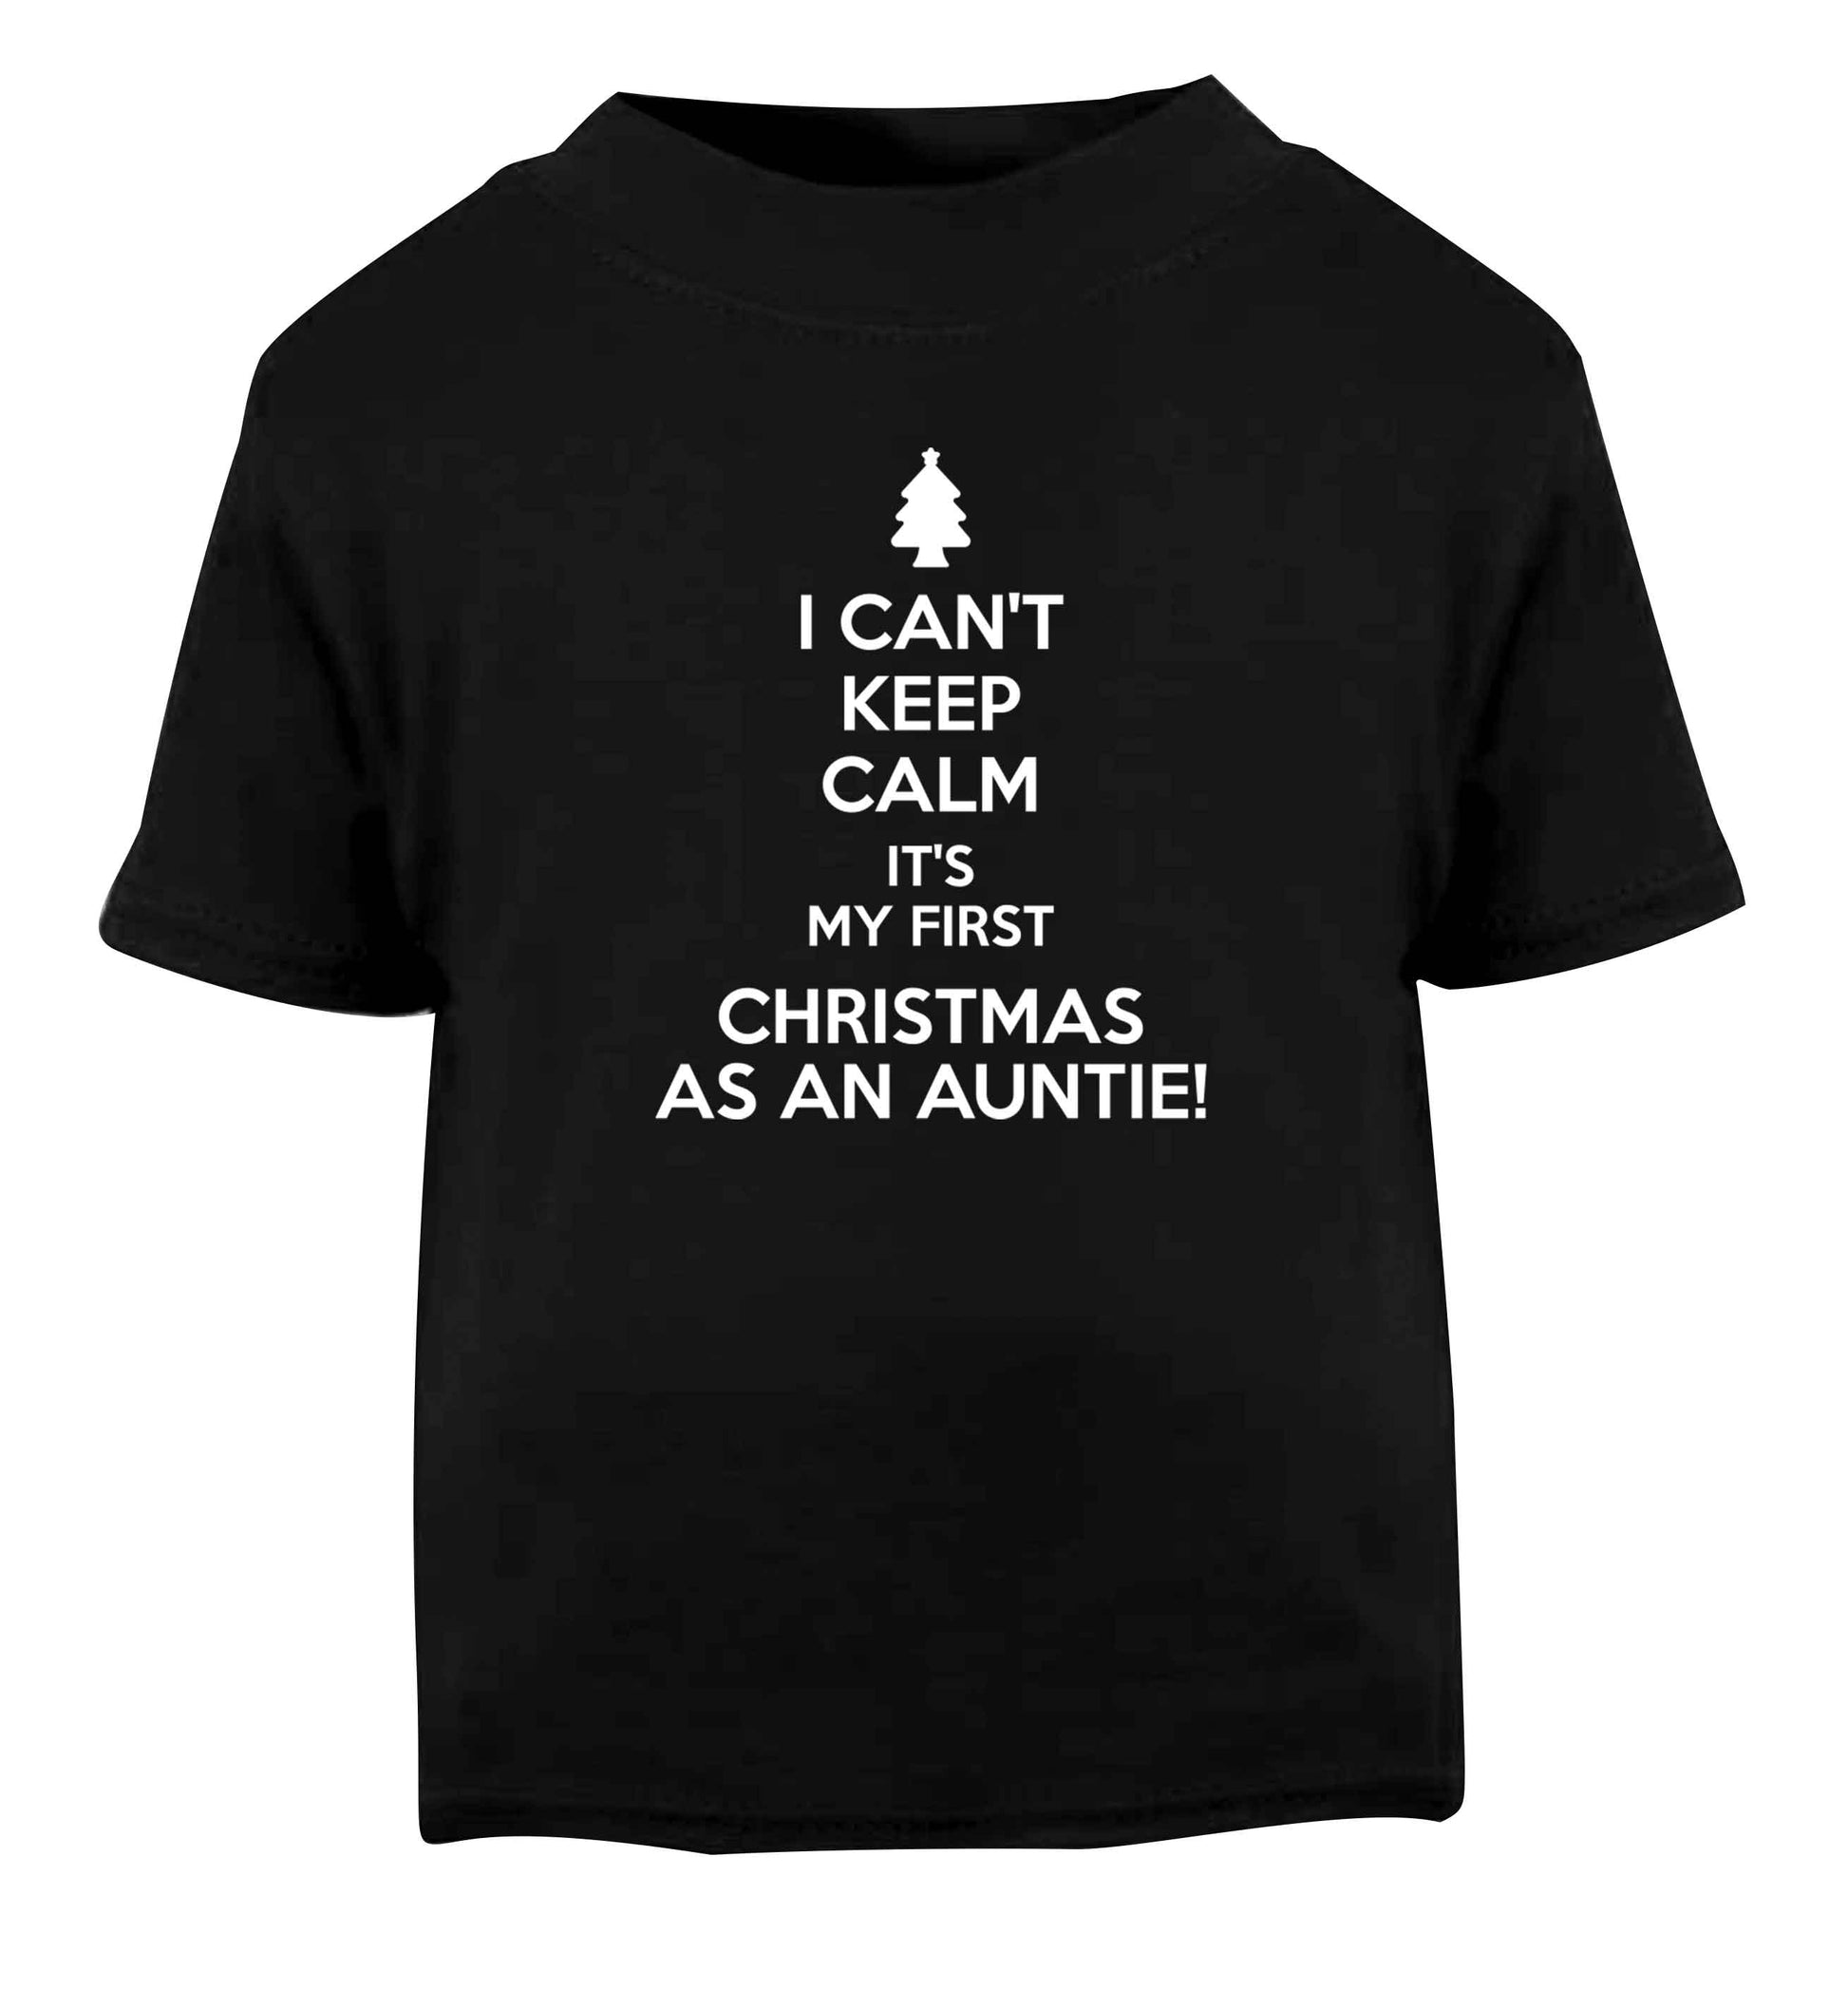 I can't keep calm it's my first Christmas as an auntie! Black Baby Toddler Tshirt 2 years